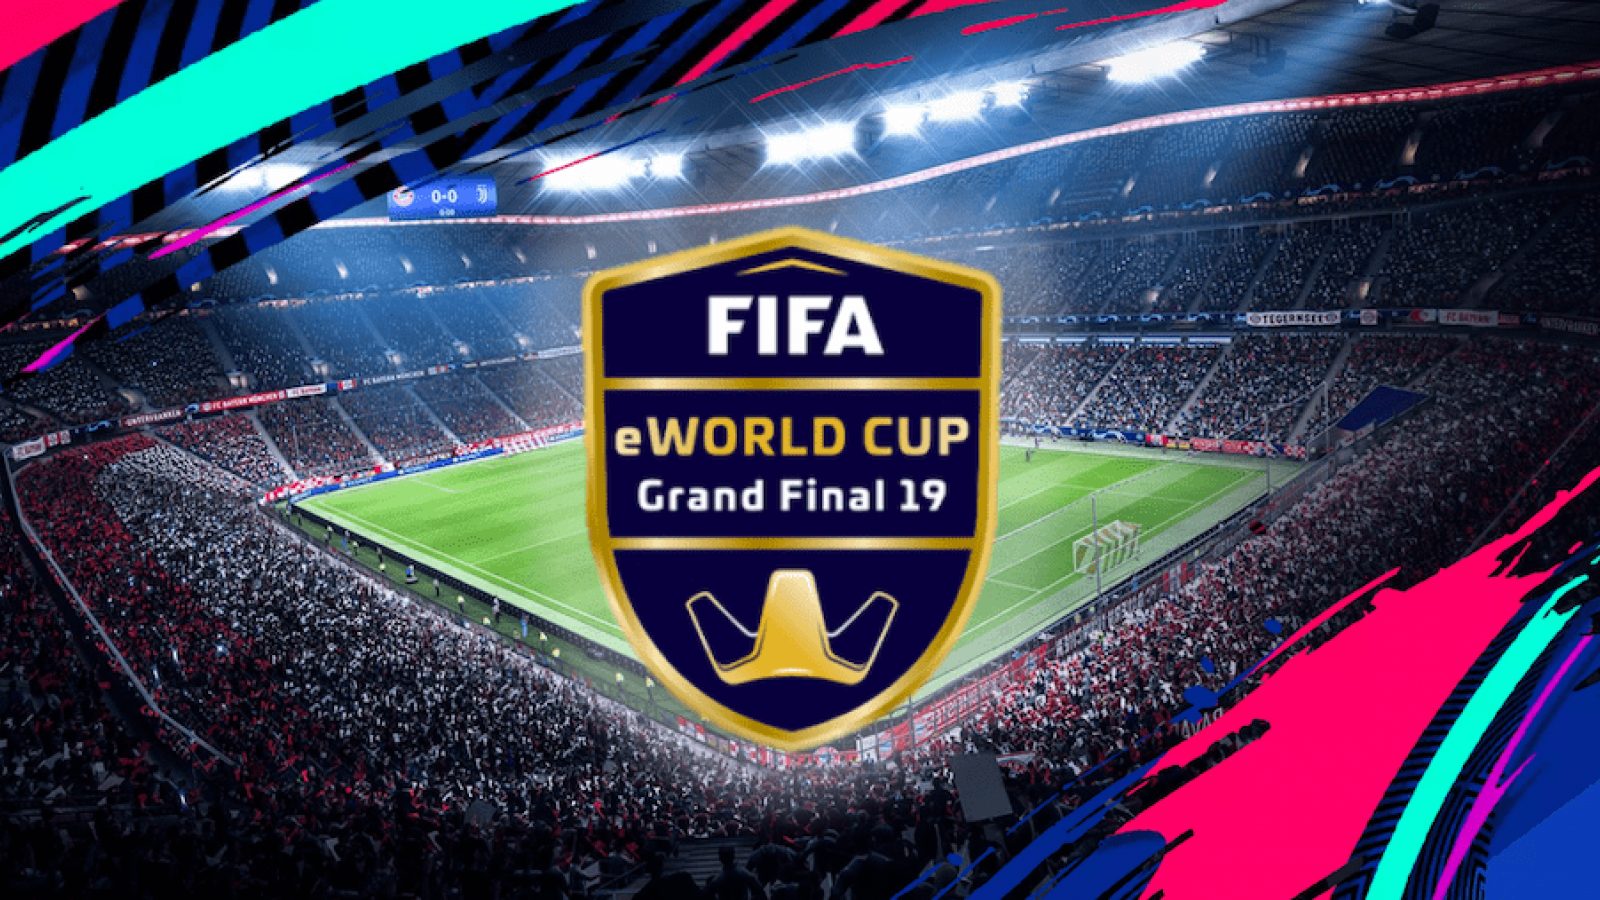 How to watch FIFA eWorld Cup 2019 Grand Final